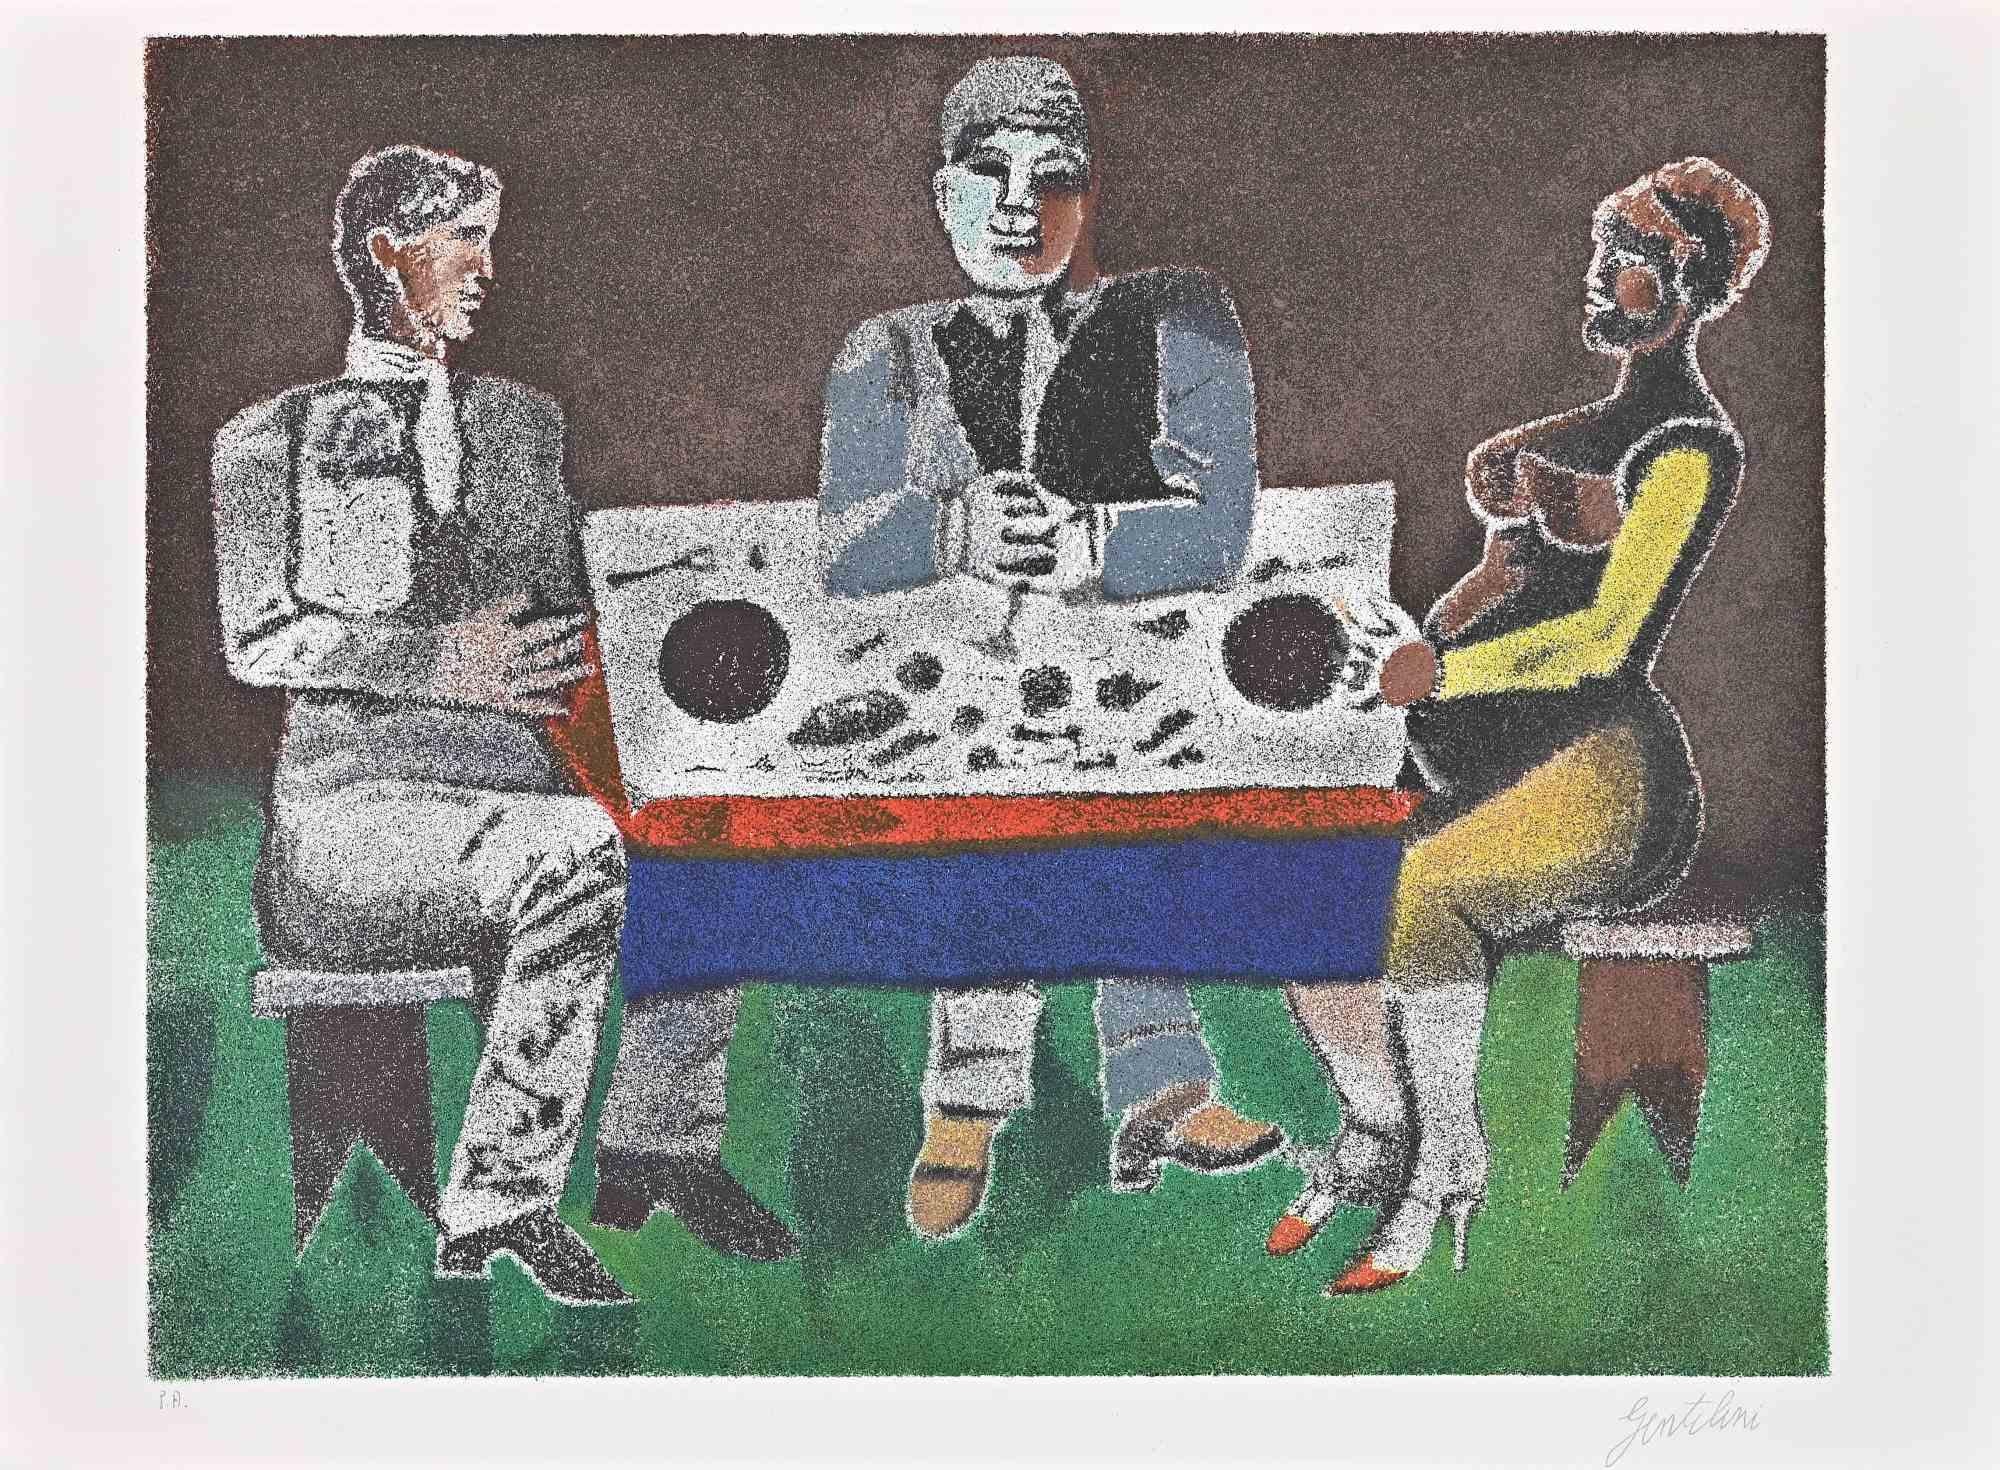 The Dinner is a Lithograph realized by Franco Gentilini (Italian Painter, 1909-1981), in the 1970s.

The state of preservation of the artwork is very good.

Hand-signed.

Artist's proof.

Franco Gentilini ( Italian Painter, 1909-1981): Gentilini's